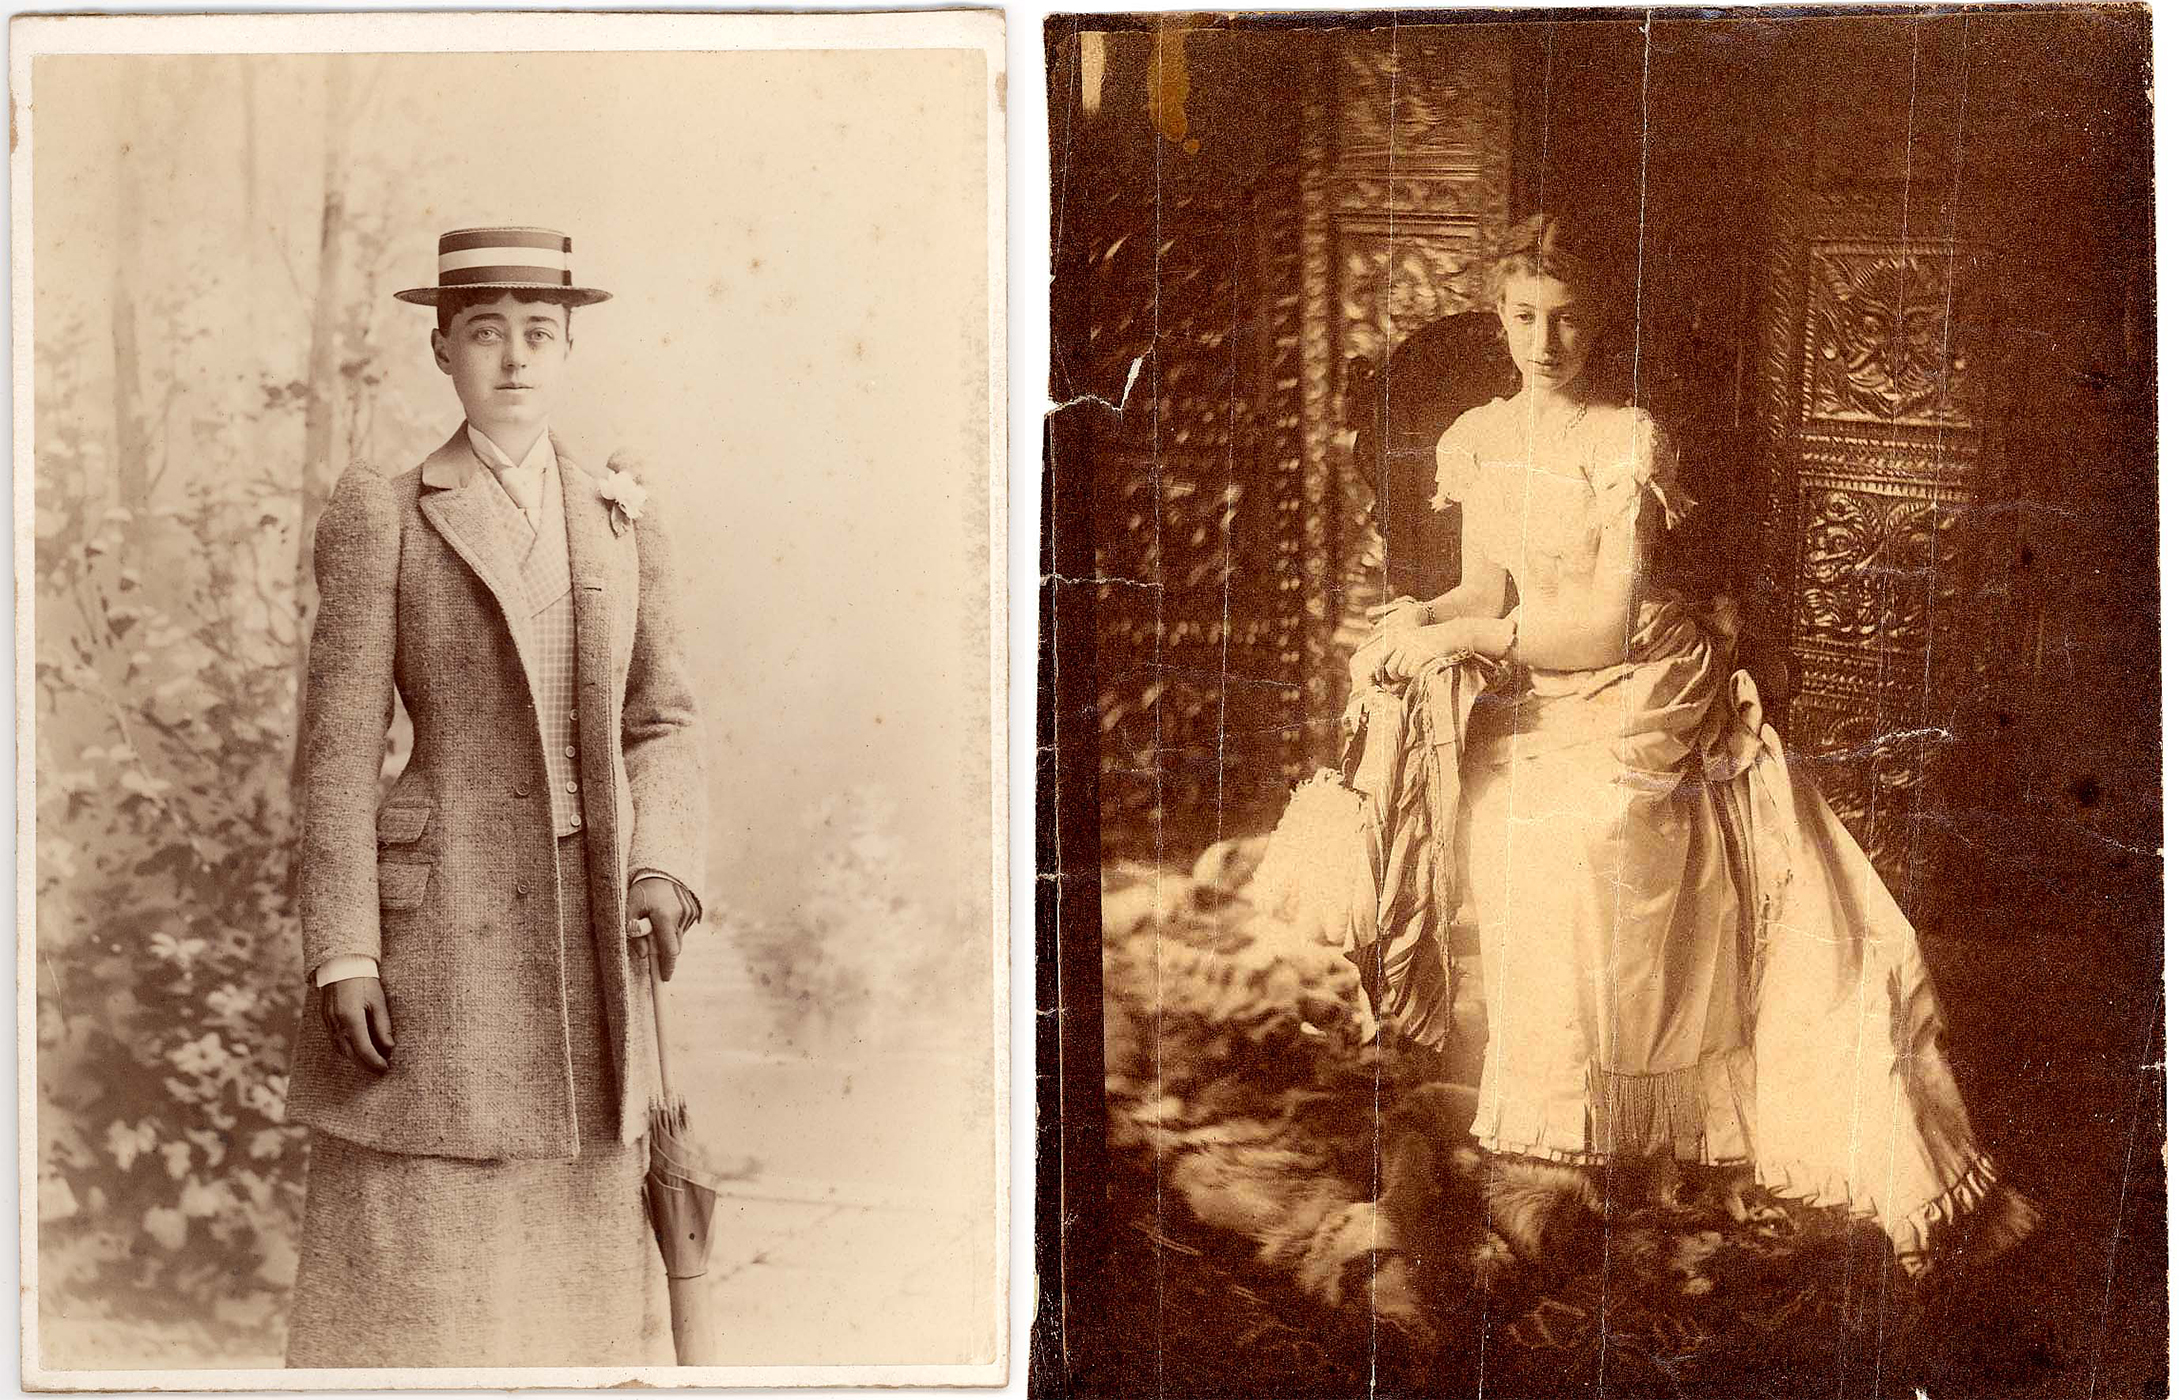 Composite image of two photographs side by side. The photograph on the left is of a young woman in her twenties standing wearing a boating hat, a long coat, skirt, and holding a folded umbrella in her left hand. She looks at the viewer and there is foliage behind her. The picture on the right is of another young woman, seated and looking down. She wears a long dress.